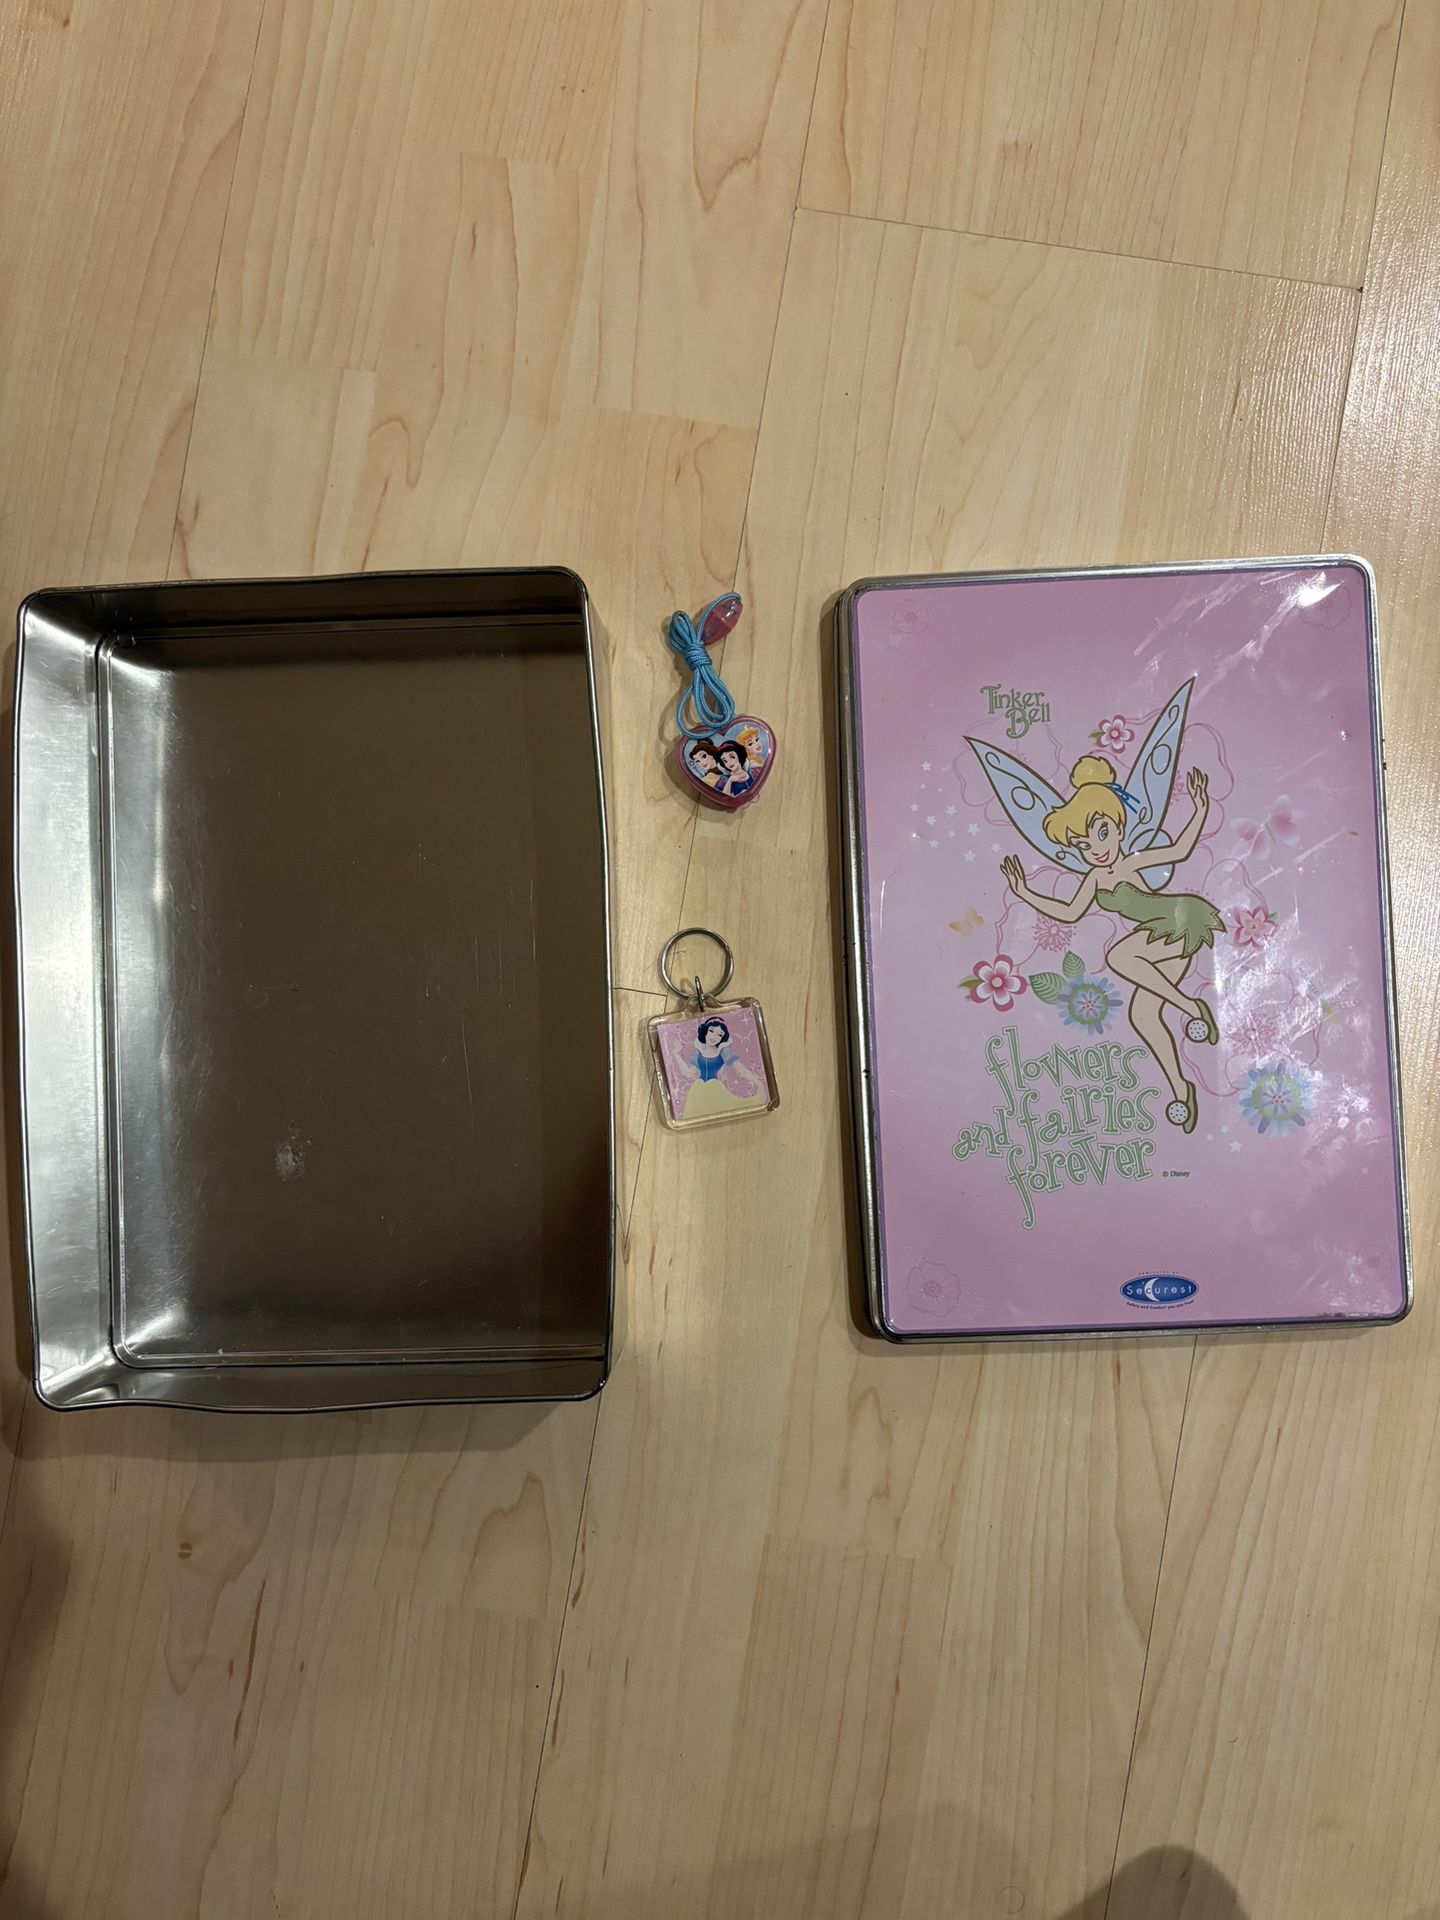 Disney’s Tinker Bell Metal Box For Storage With A Free Princess Key Chain N Free Heart Shaped Container